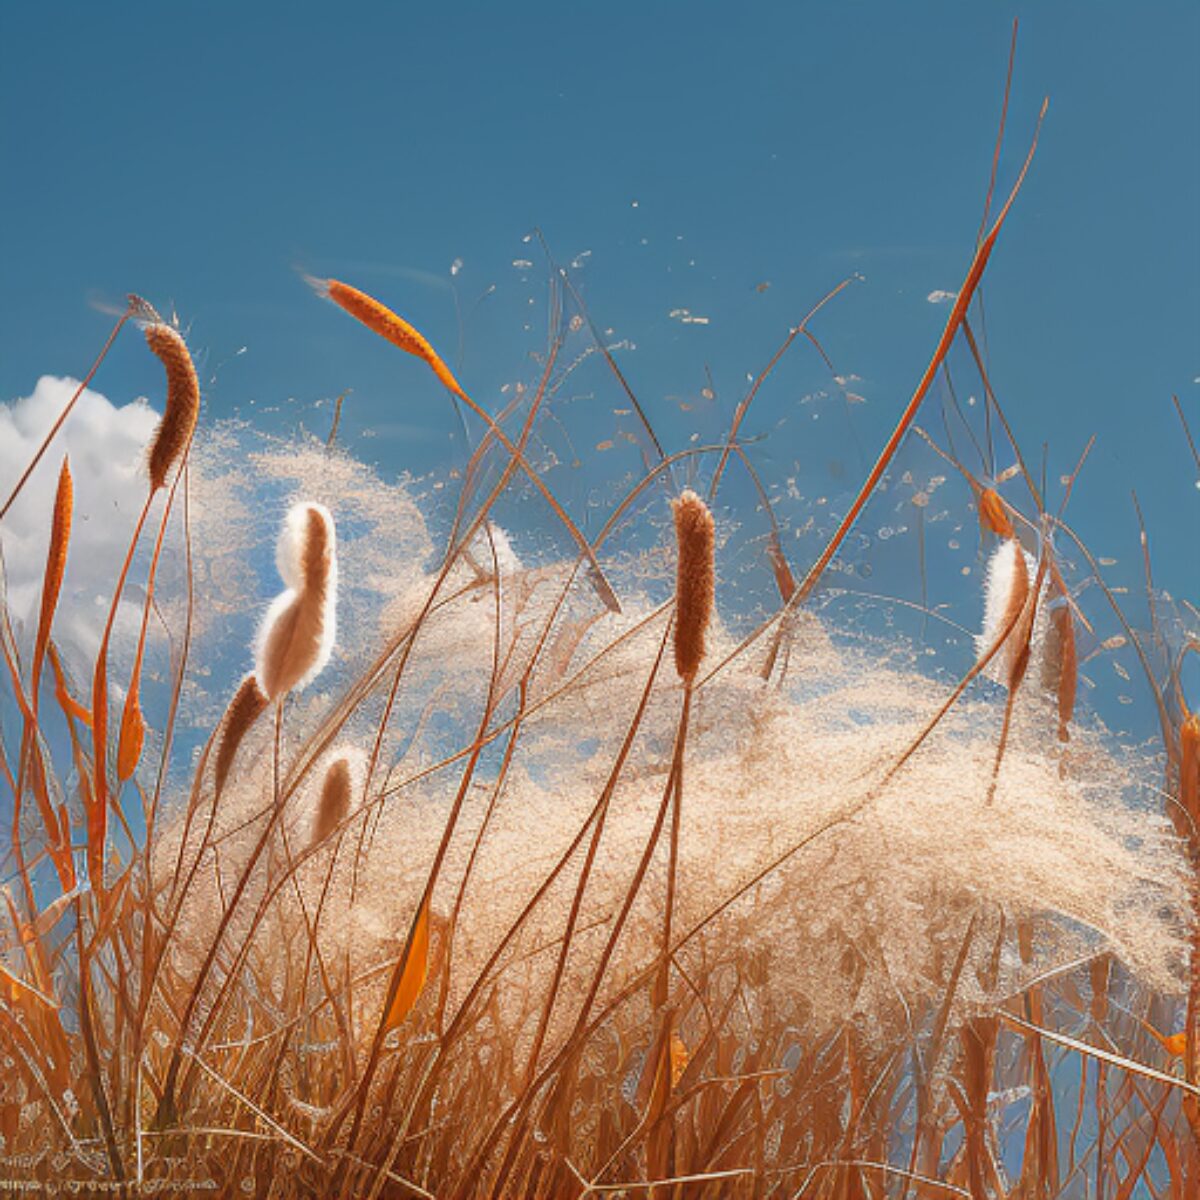 Cattail seeds blowing in the wind